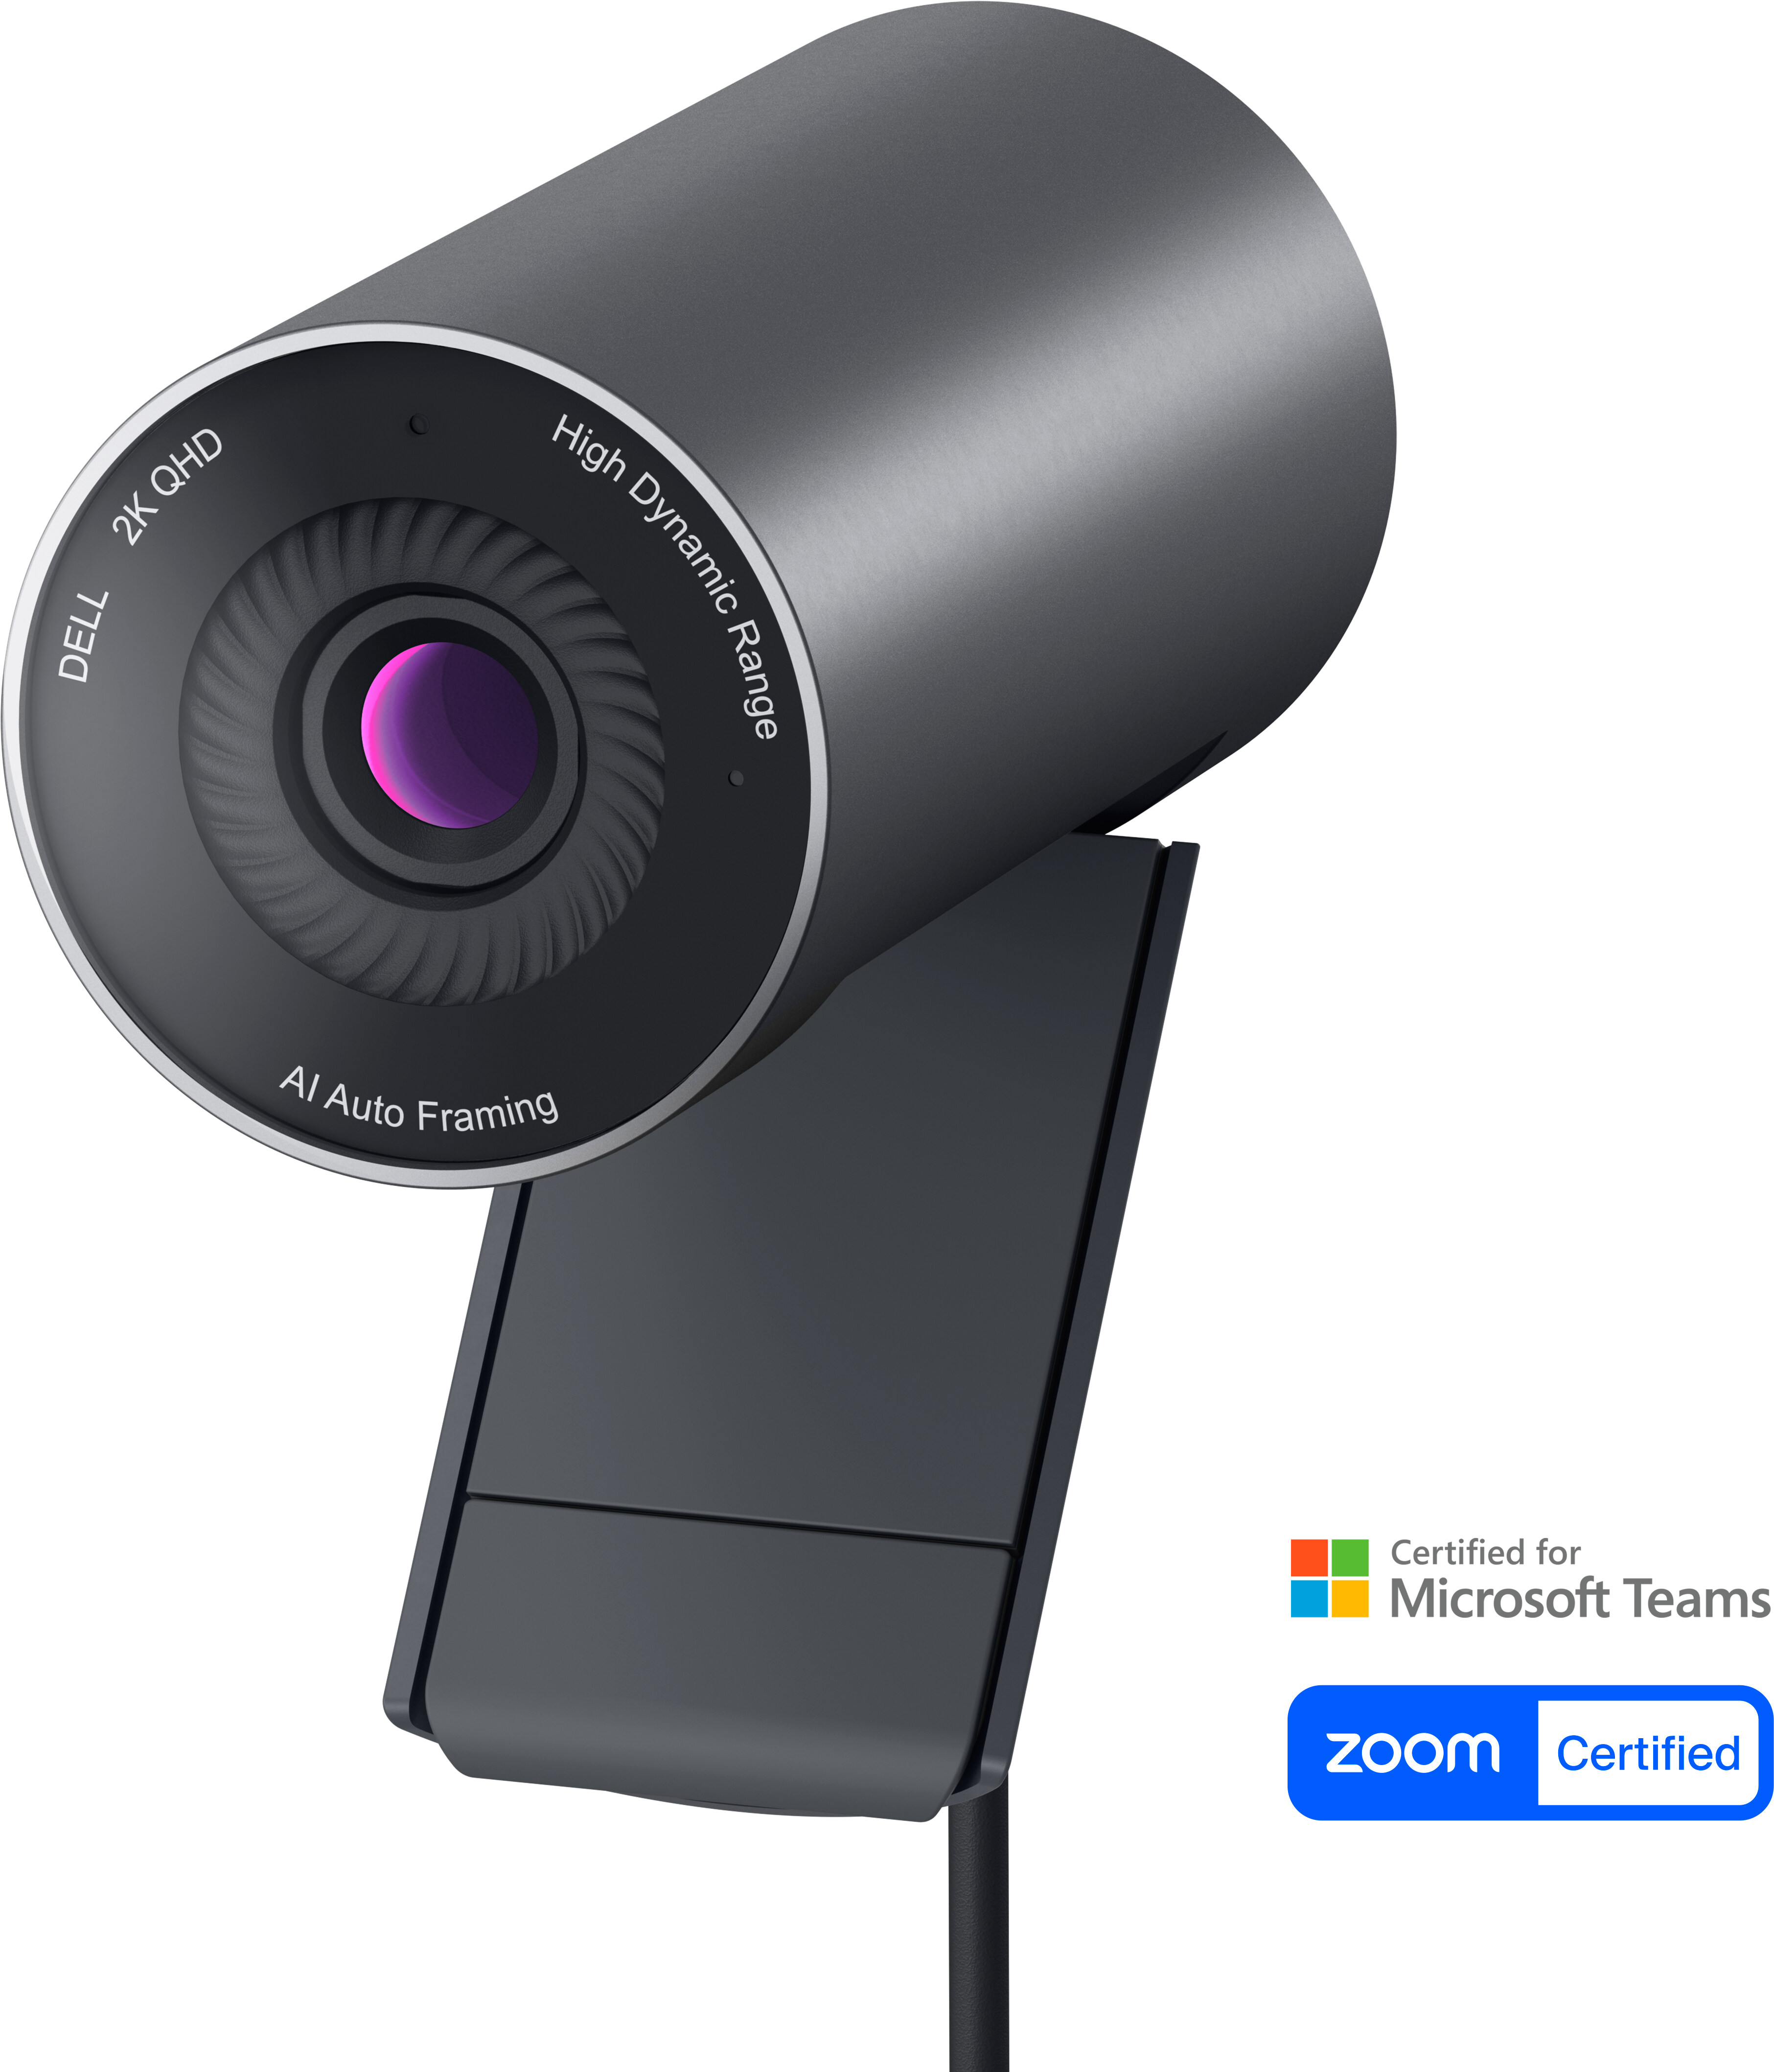 https://i.dell.com/is/image/DellContent/content/dam/ss2/product-images/dell-client-products/peripherals/webcams/wb5023-dell-pro-webcam/media-gallery/webcam-wb5023-black-gallery-1-zoom.psd?fmt=pjpg&pscan=auto&scl=1&wid=3625&hei=4233&qlt=100,1&resMode=sharp2&size=3625,4233&chrss=full&imwidth=5000